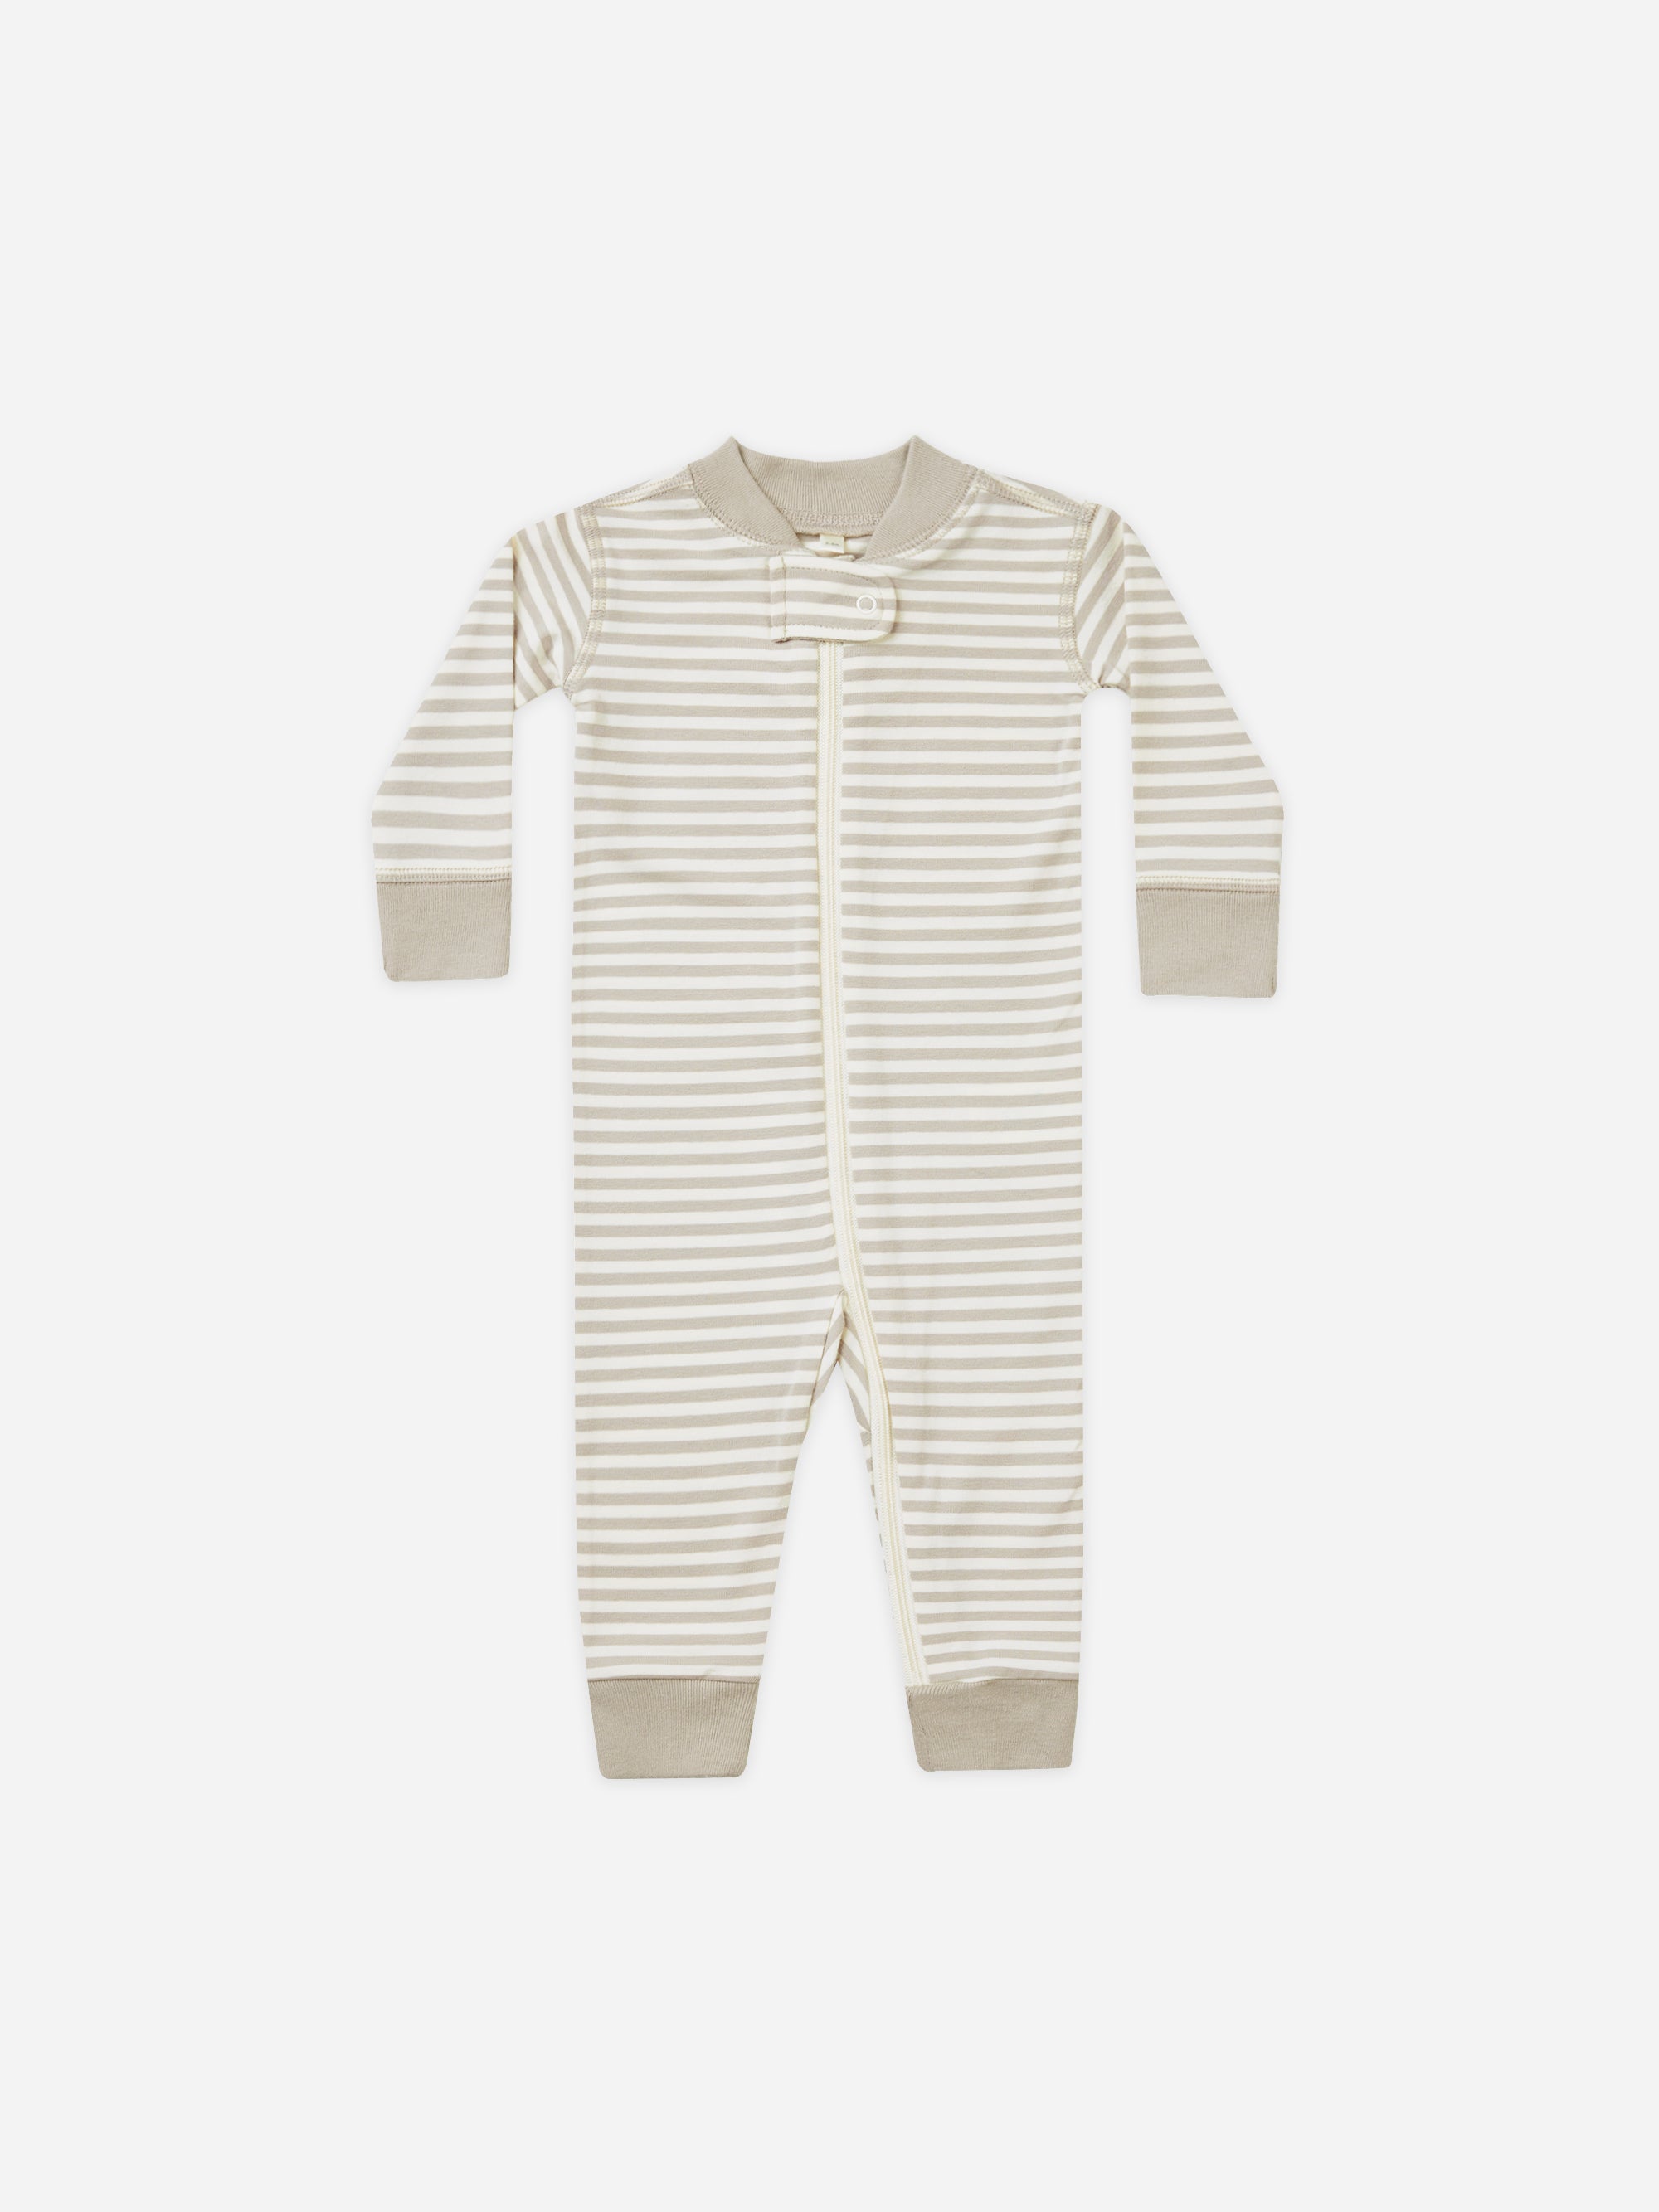 Zip Long Sleeve Sleeper || Ash Stripe - Rylee + Cru | Kids Clothes | Trendy Baby Clothes | Modern Infant Outfits |